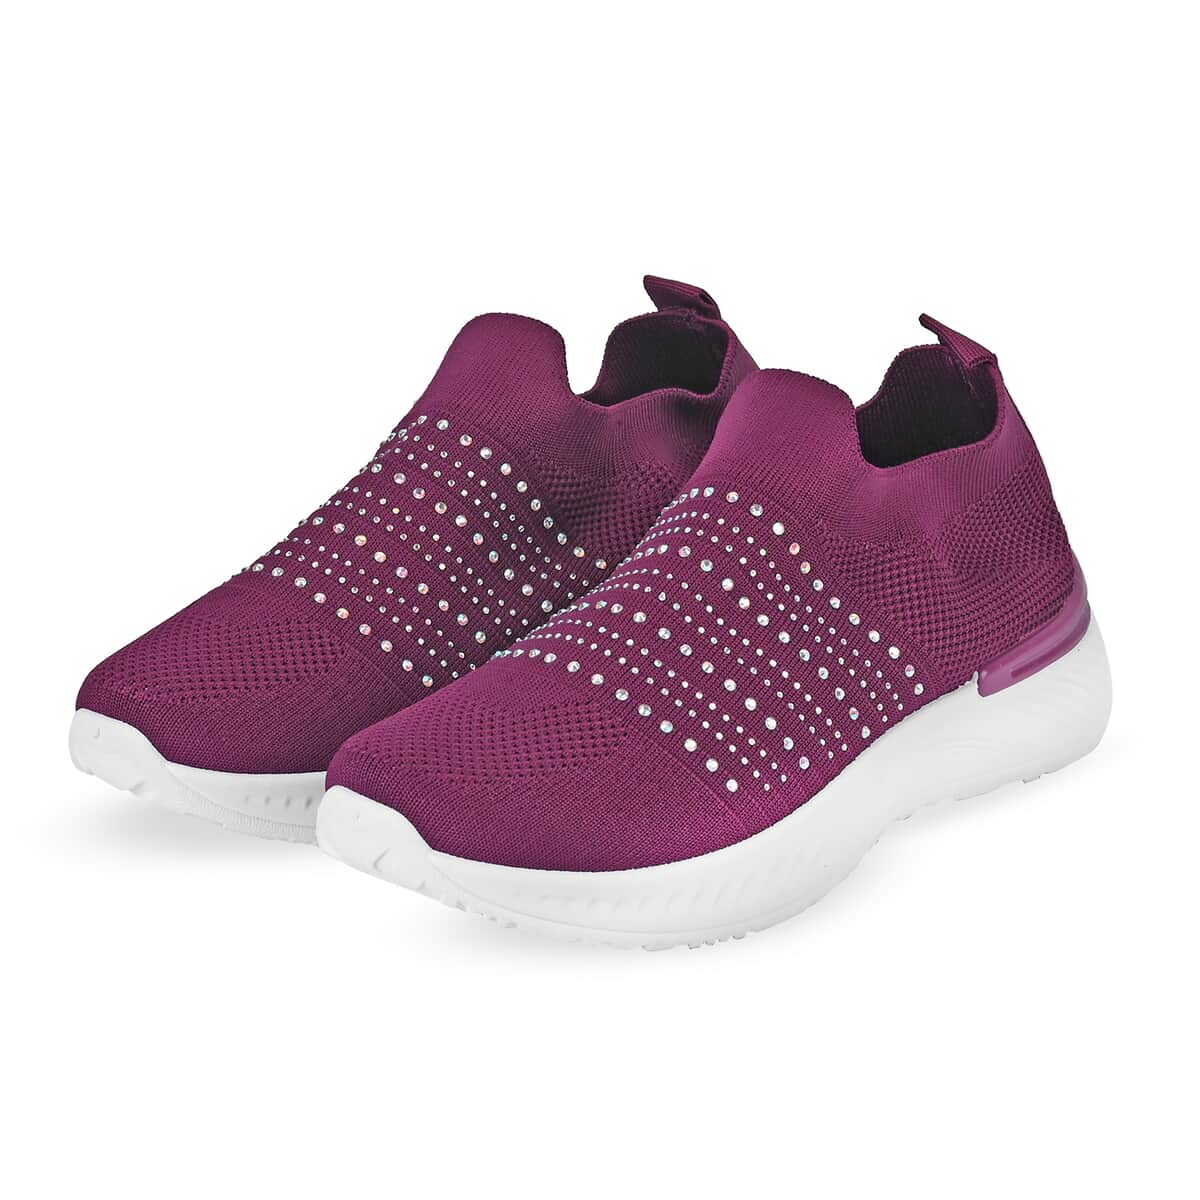 Purple Women's Crystal Jeweled Knit Vented Trainers - (Size 7-7.5) image number 0